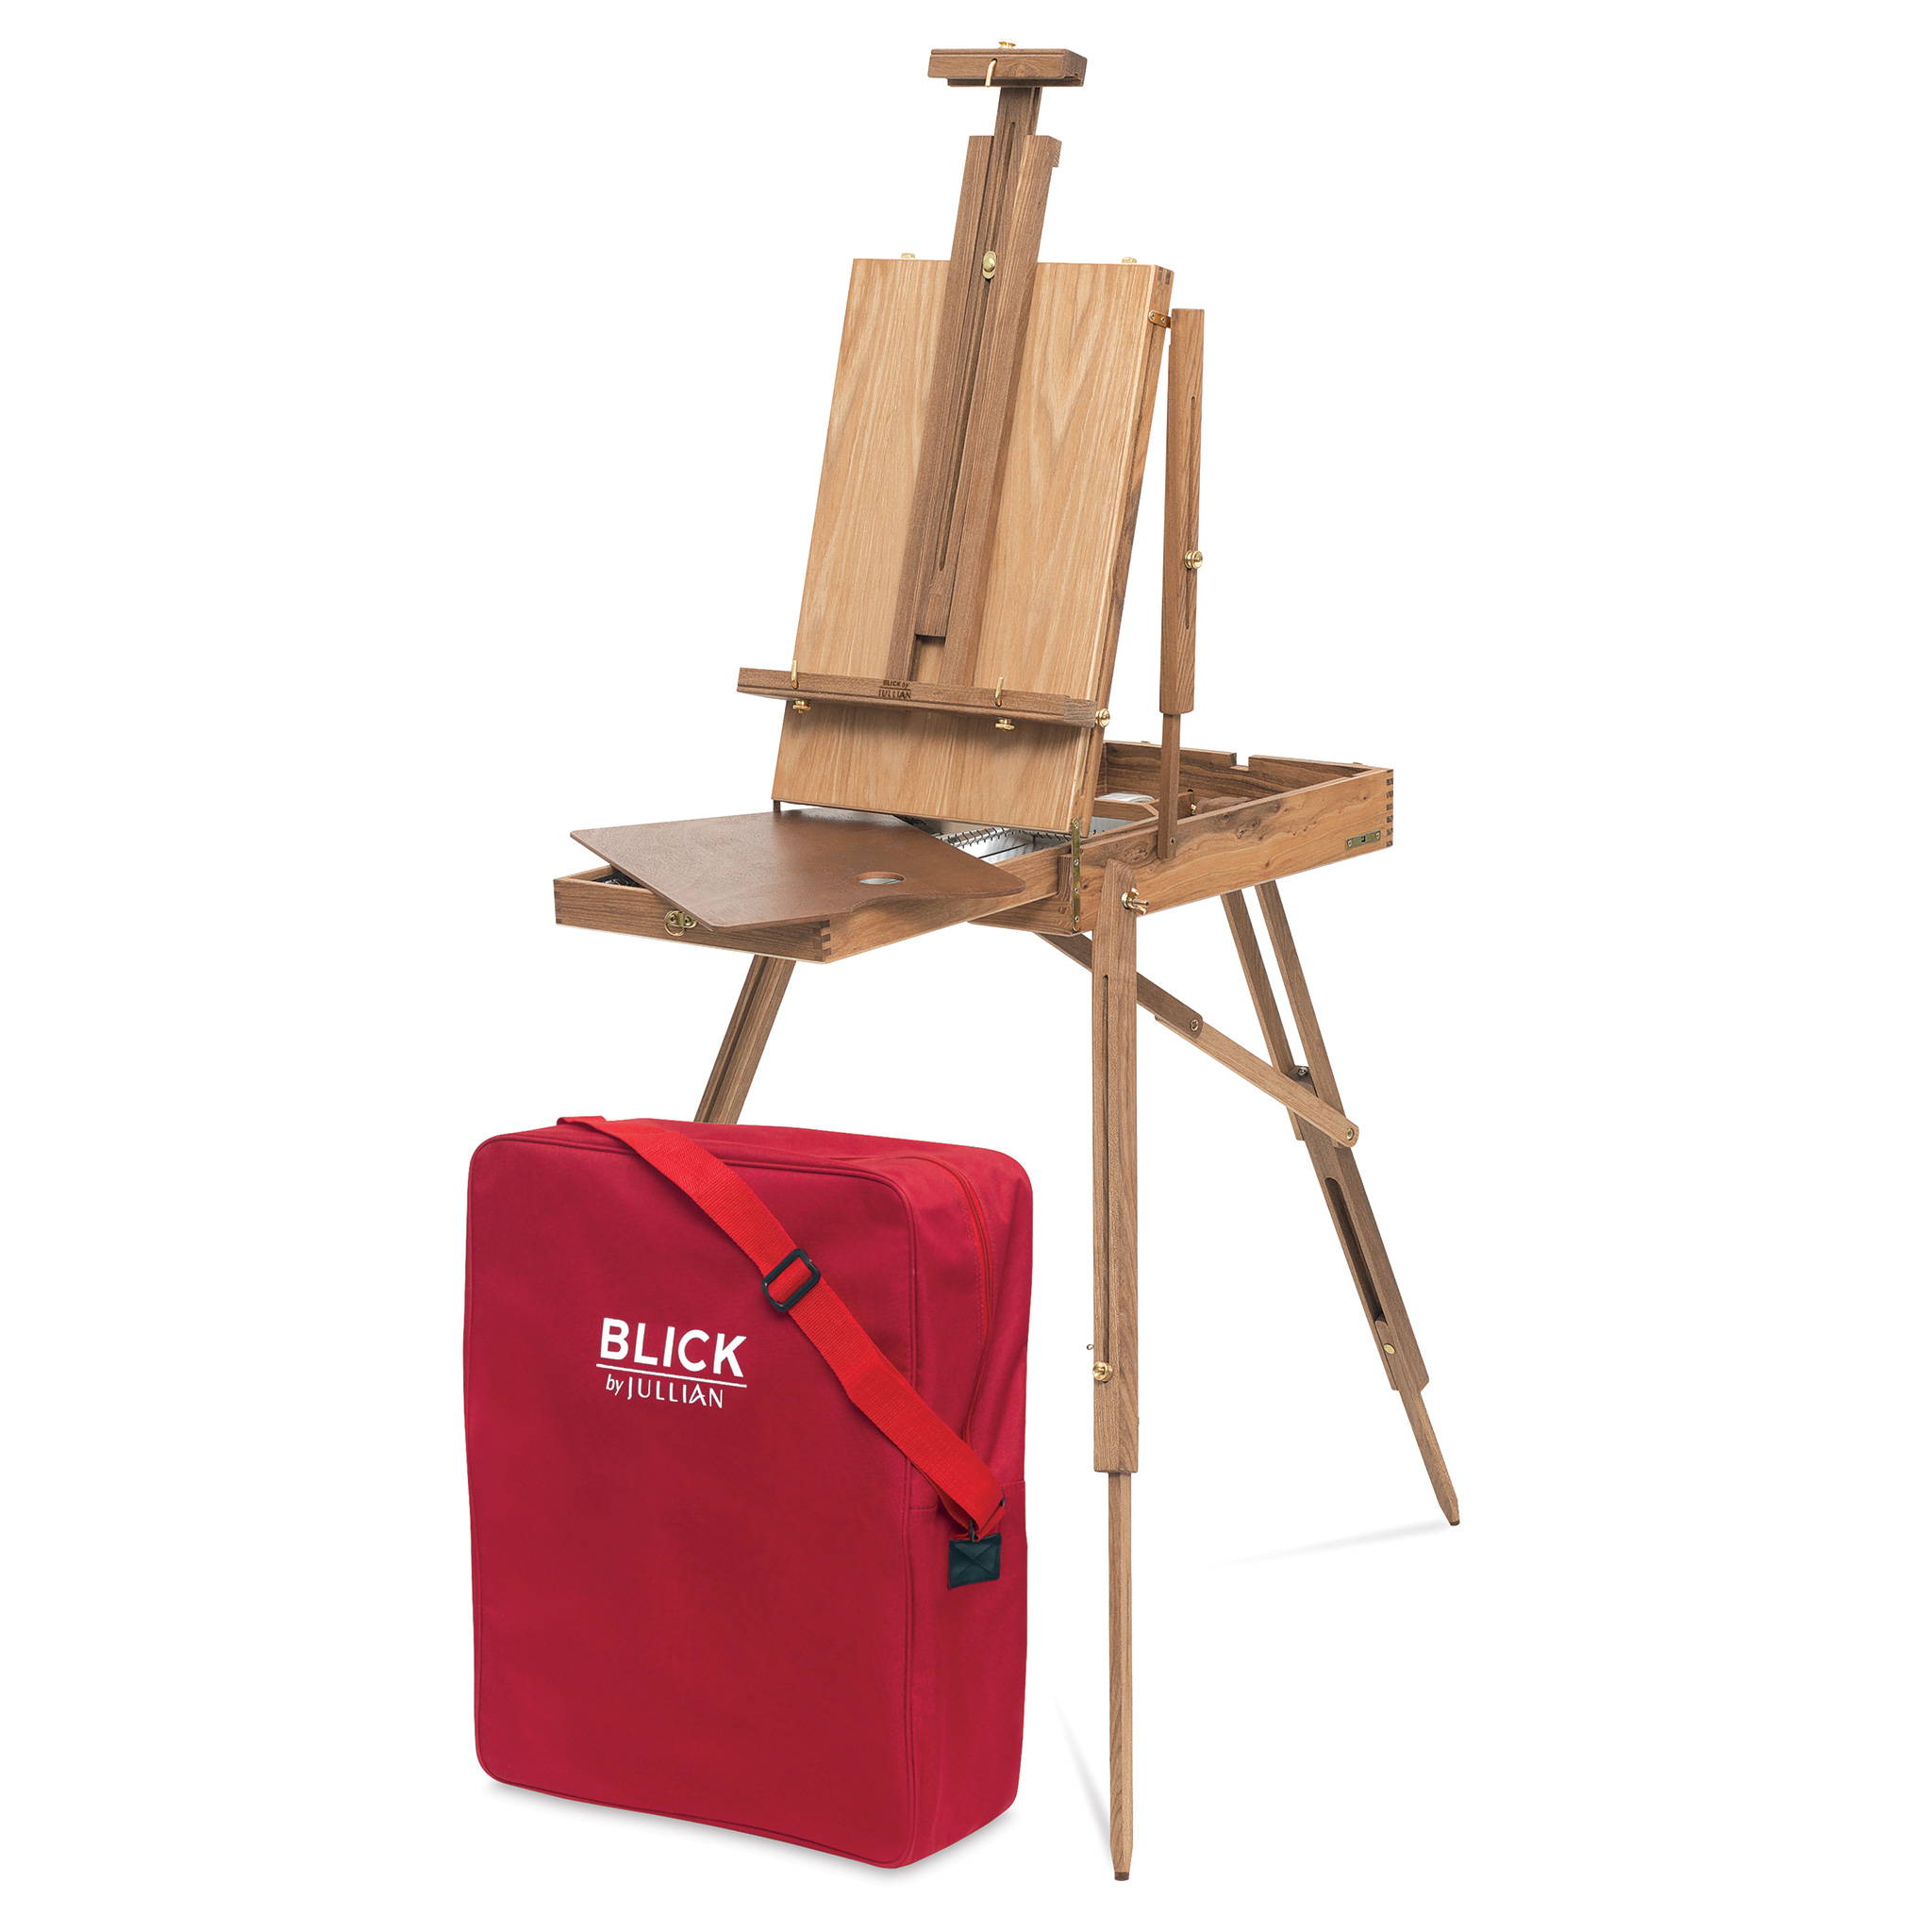 4 Legs French Easel - Portable Plein Air Studio Easel Stand with Bigger